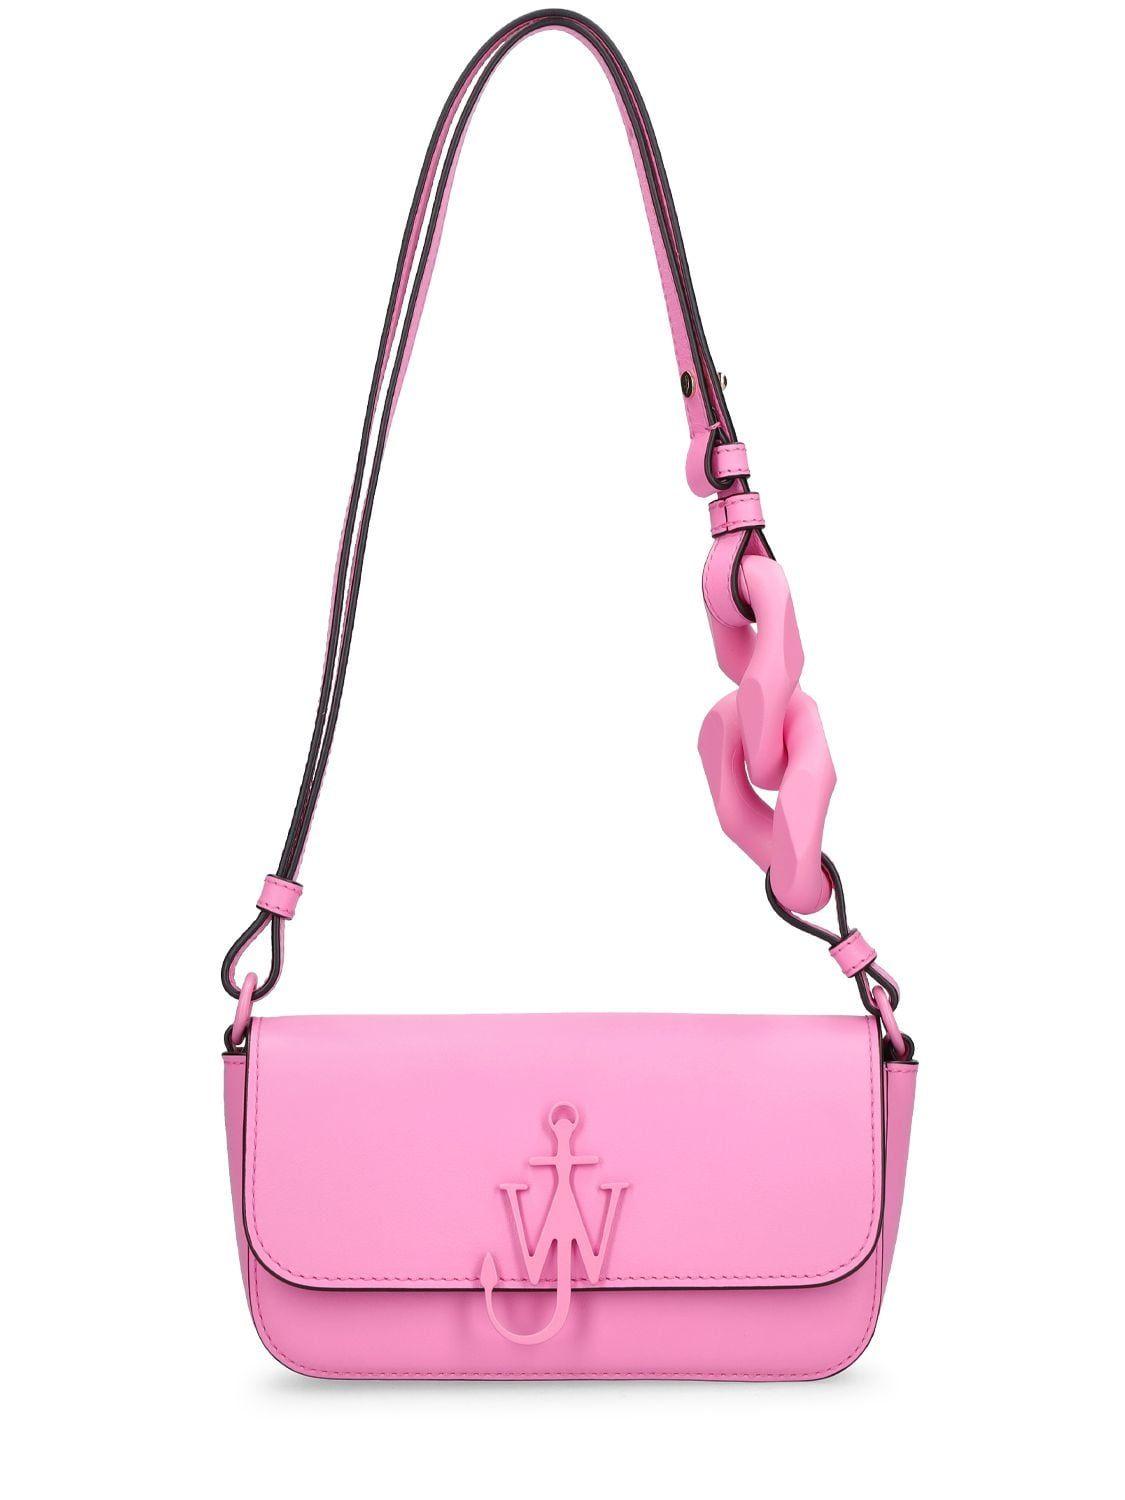 JW Anderson Tonal Chain Anchor Leather Bag in Pink | Lyst